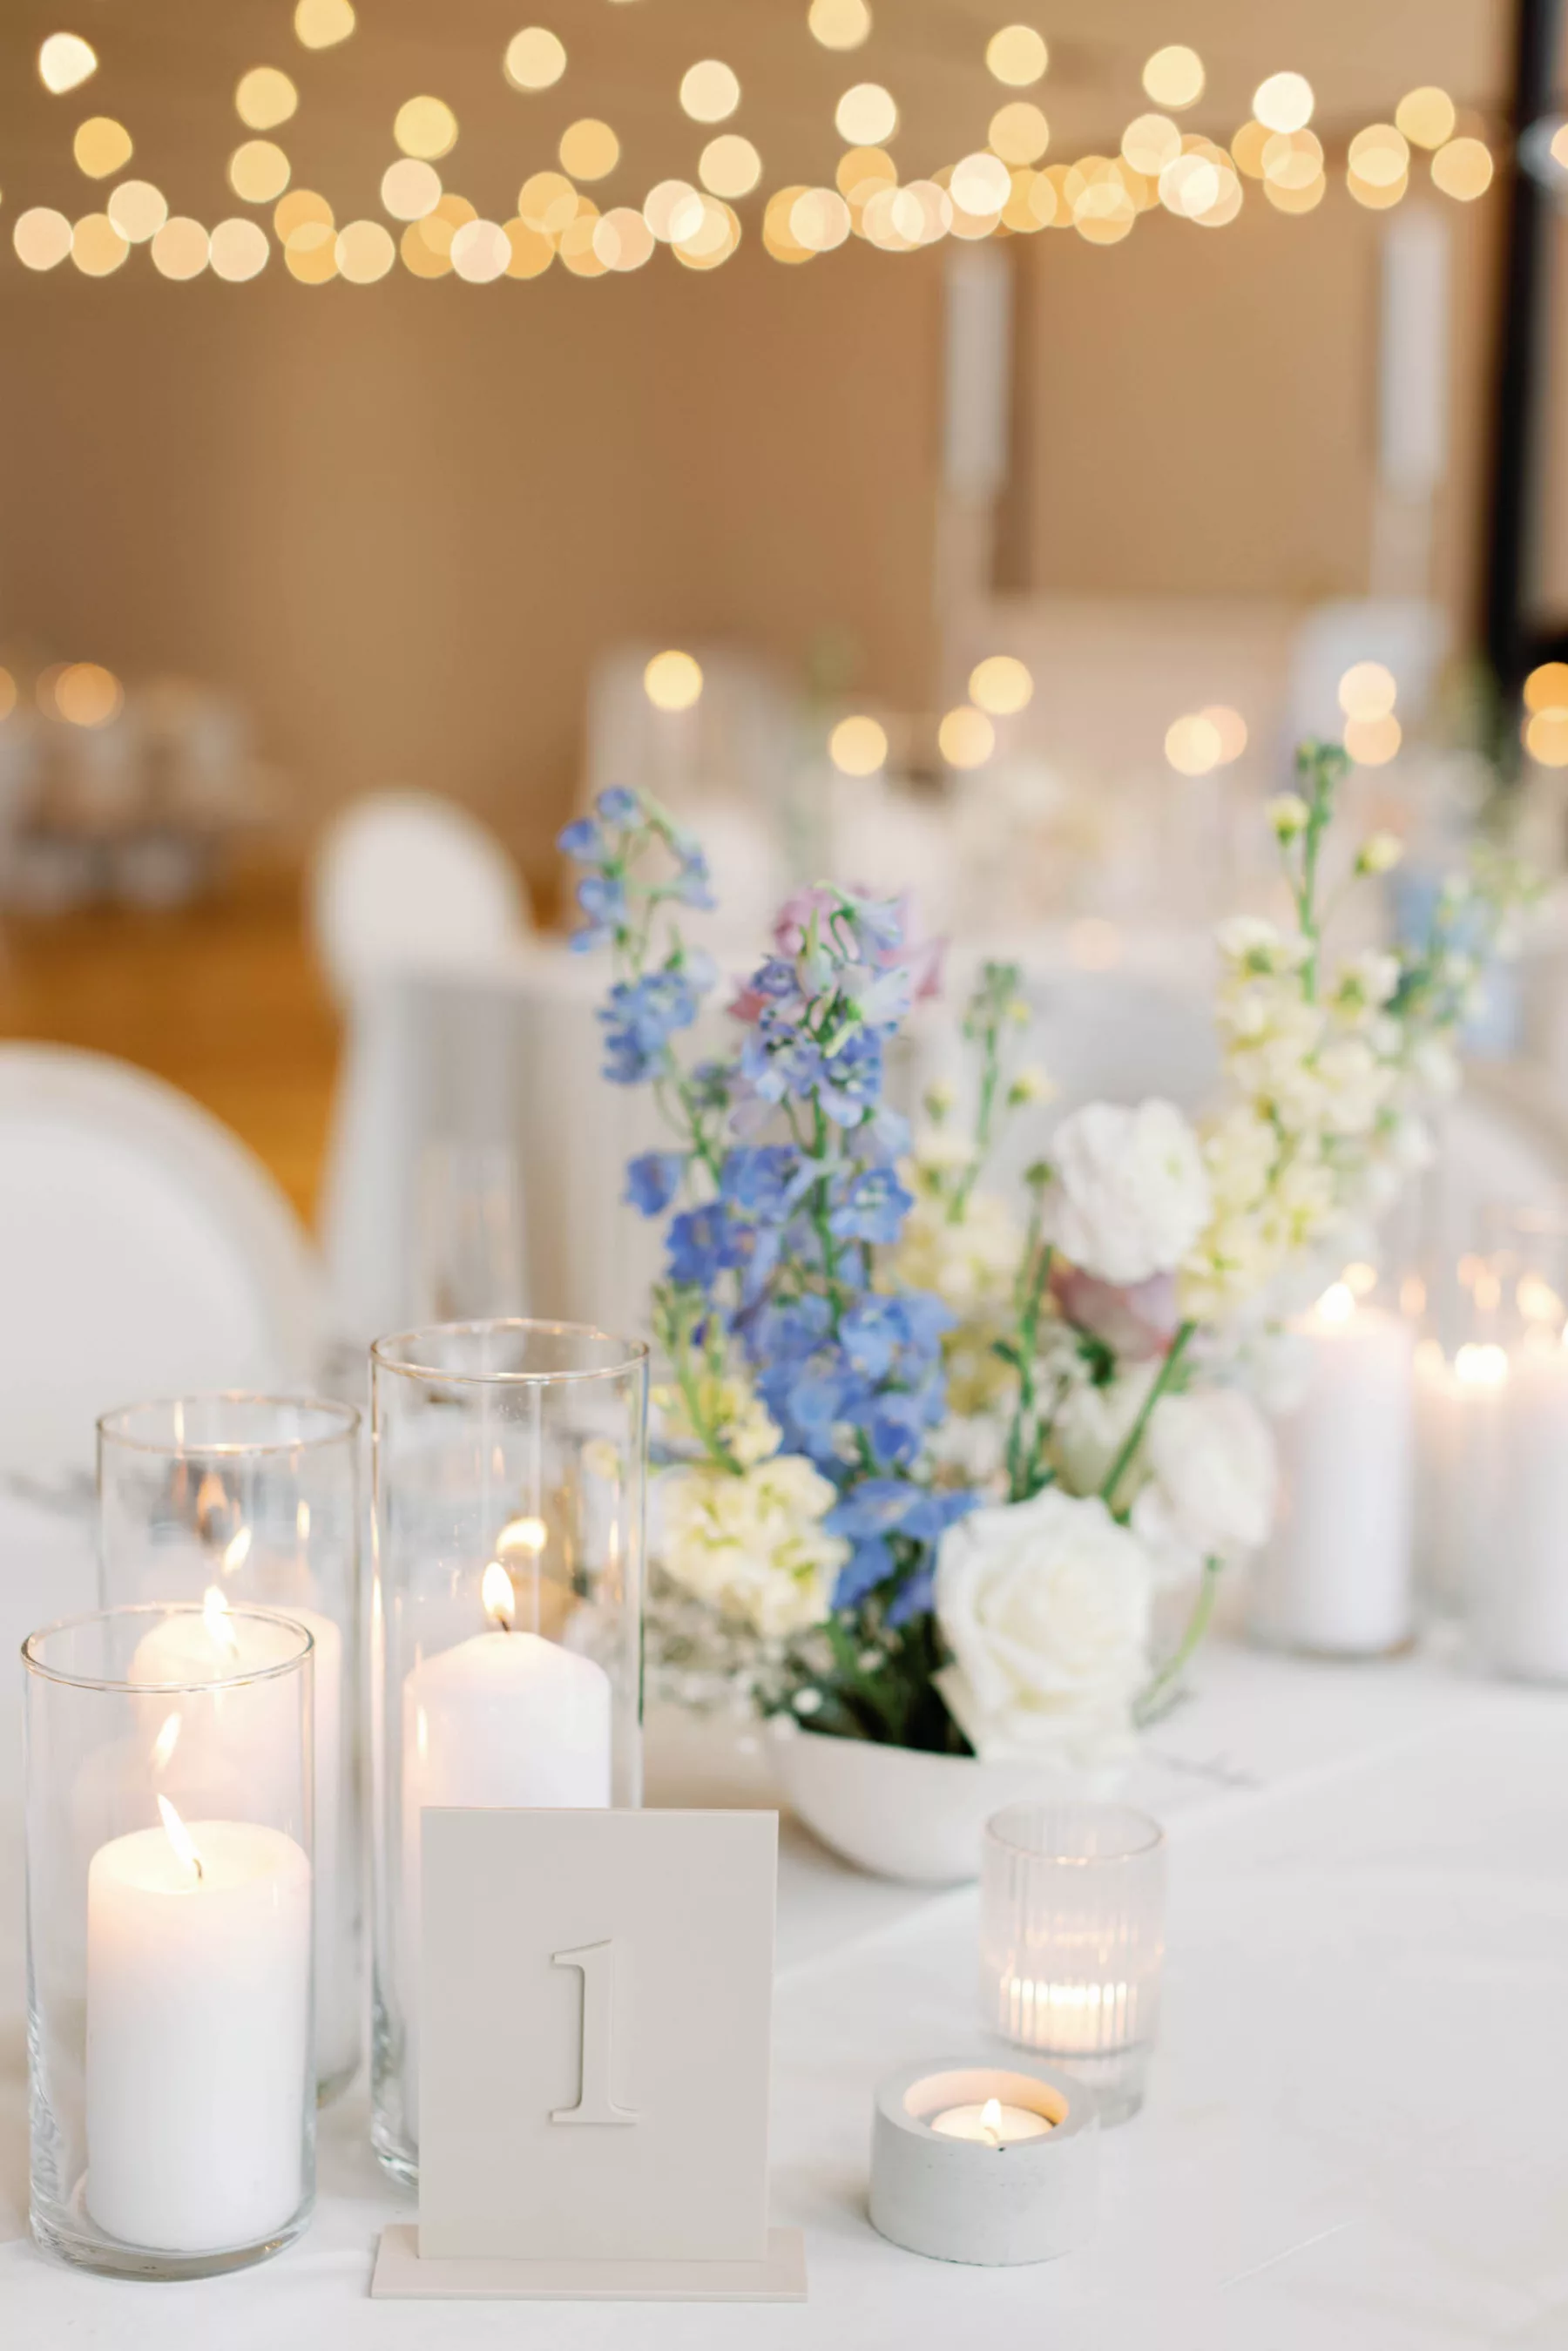 Whimsical Wedding Reception Centerpiece Decor Inspiration | Blue Lily of the Valley, White Roses, and Candlelight